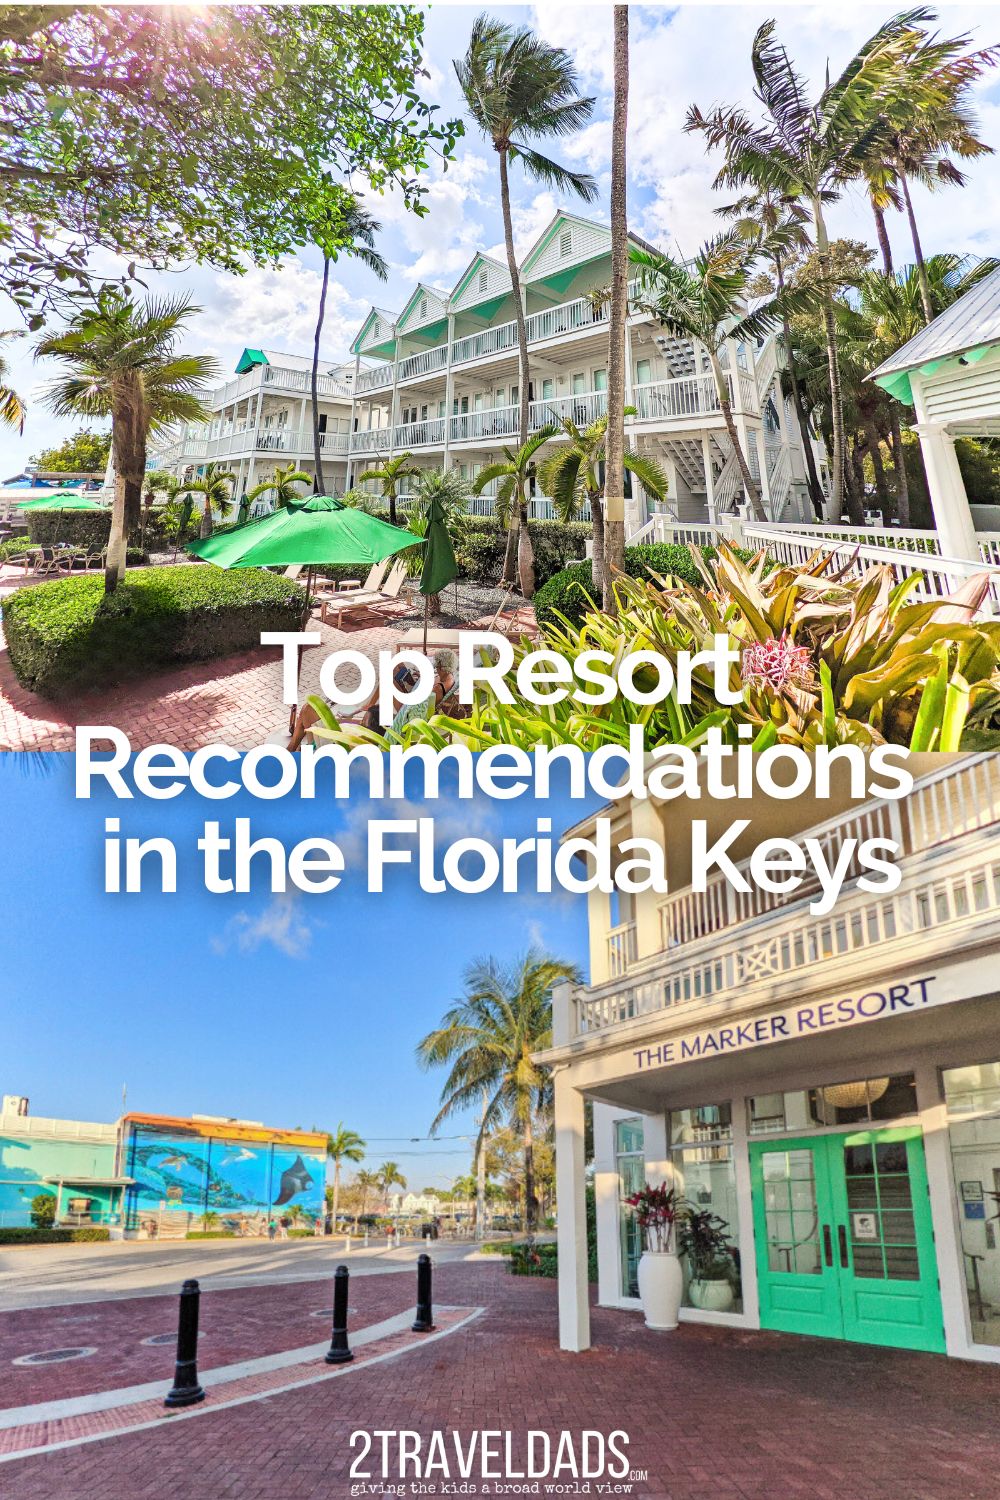 Exploring the Florida Keys for a dream vacation? We have put together our top resort recommendations in the Florida Keys to stay as you make your way south.